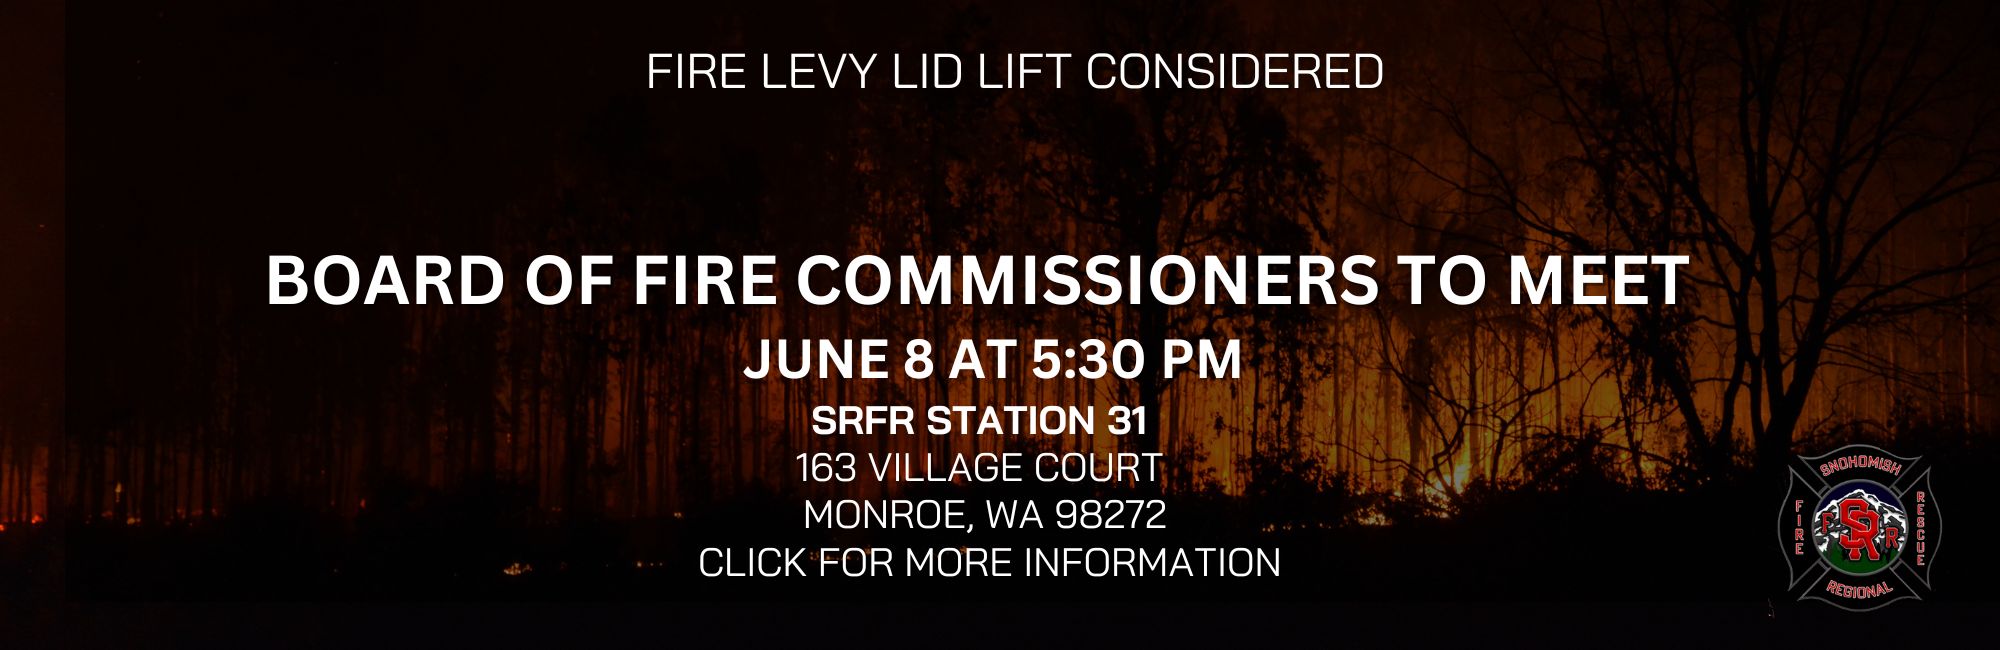 Fire Levy Lid Lift Banner